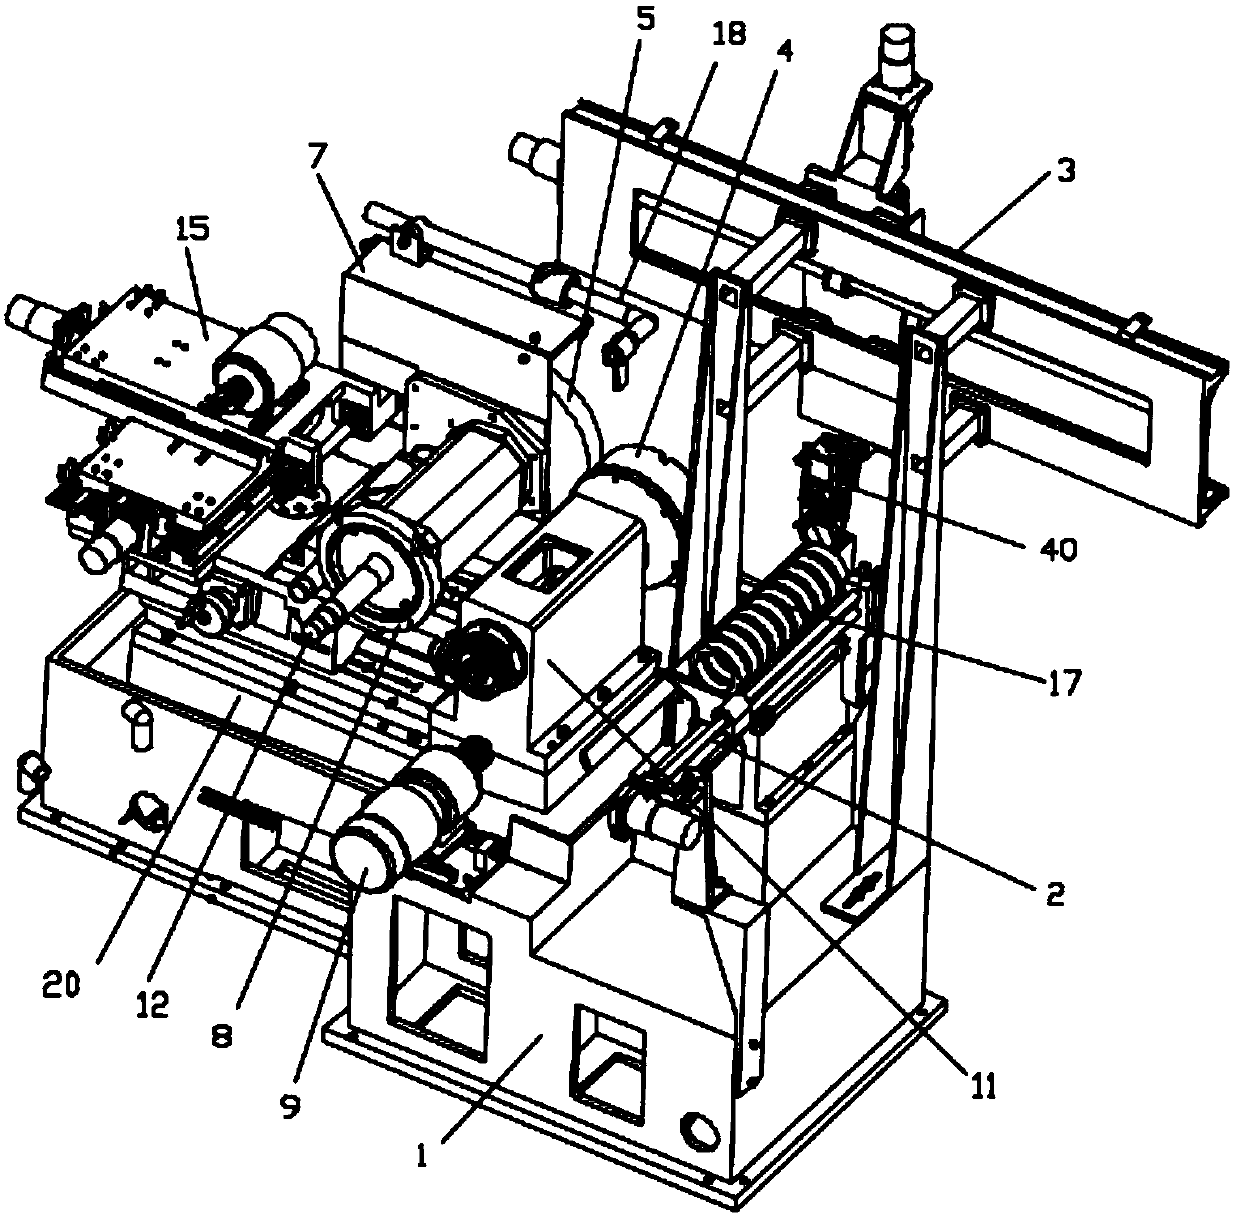 Computer numerical control grinding machine dedicated to grinding machining of outer-ring excircle and inner-ring outer raceway of bearing